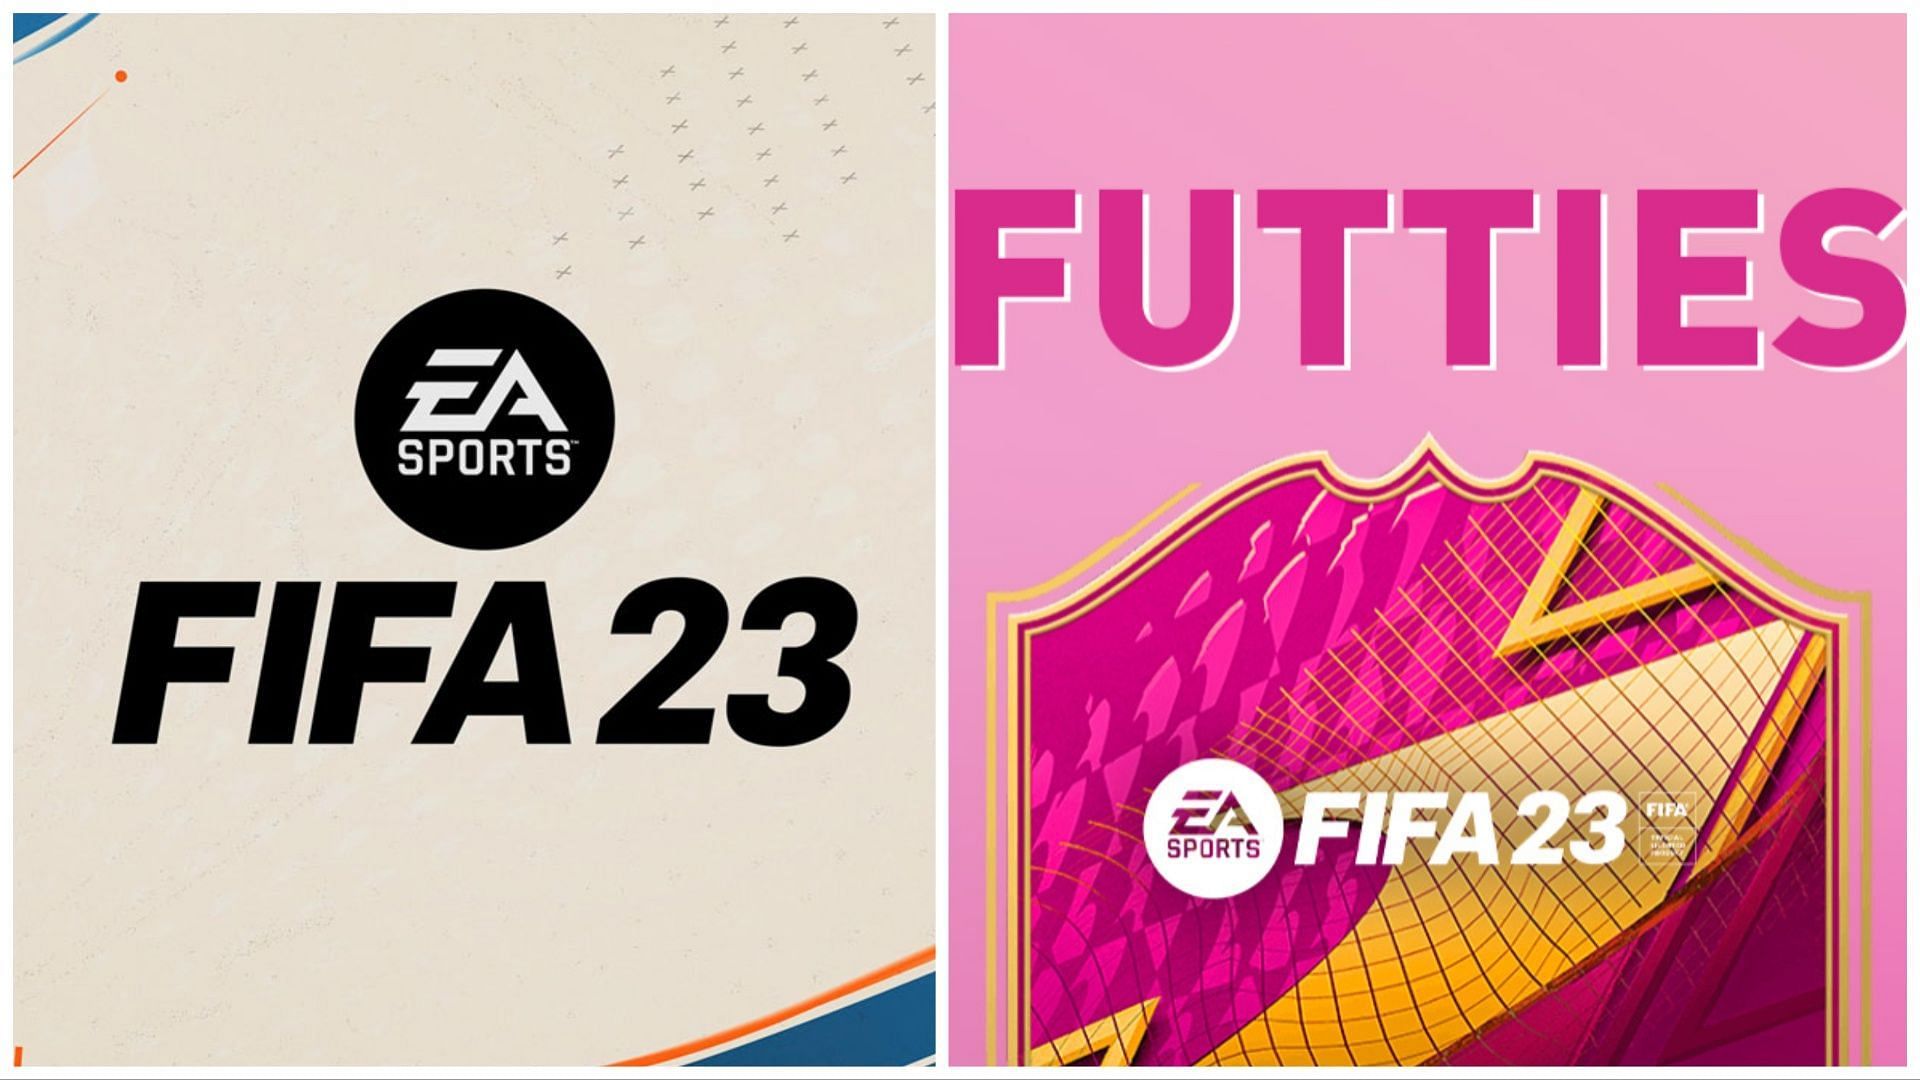 The FUTTIES promo could be delayed (Images via EA Sports and FIFPlay)